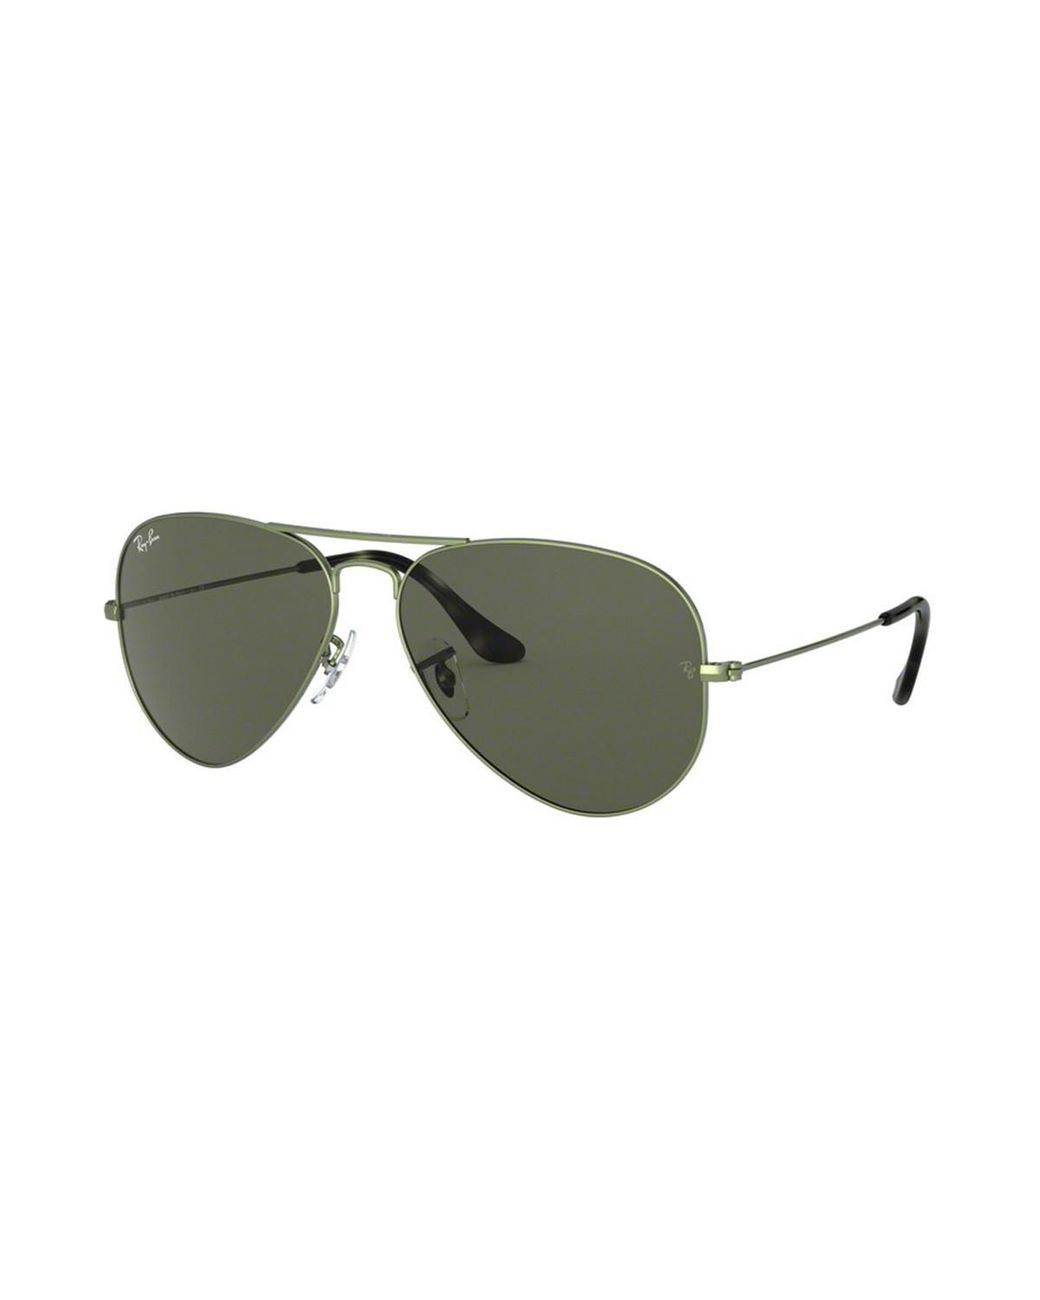 Ray Ban Rb3025 Aviator Large Metal Sunglasses Green For Men Lyst